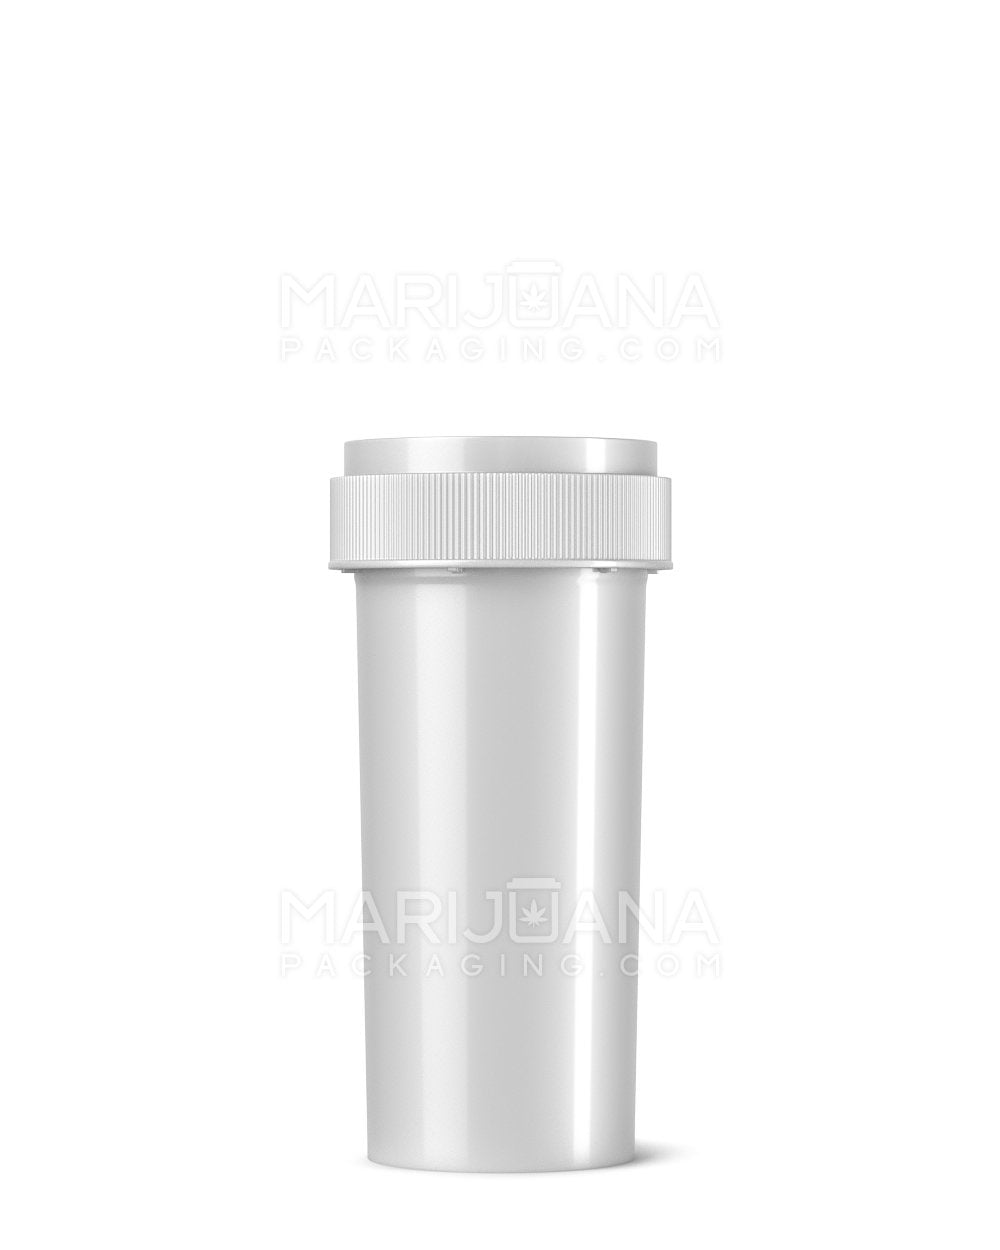 Child Resistant Opaque Silver Blank Reversible Cap Vials | 30dr - 7g | Sample - 1